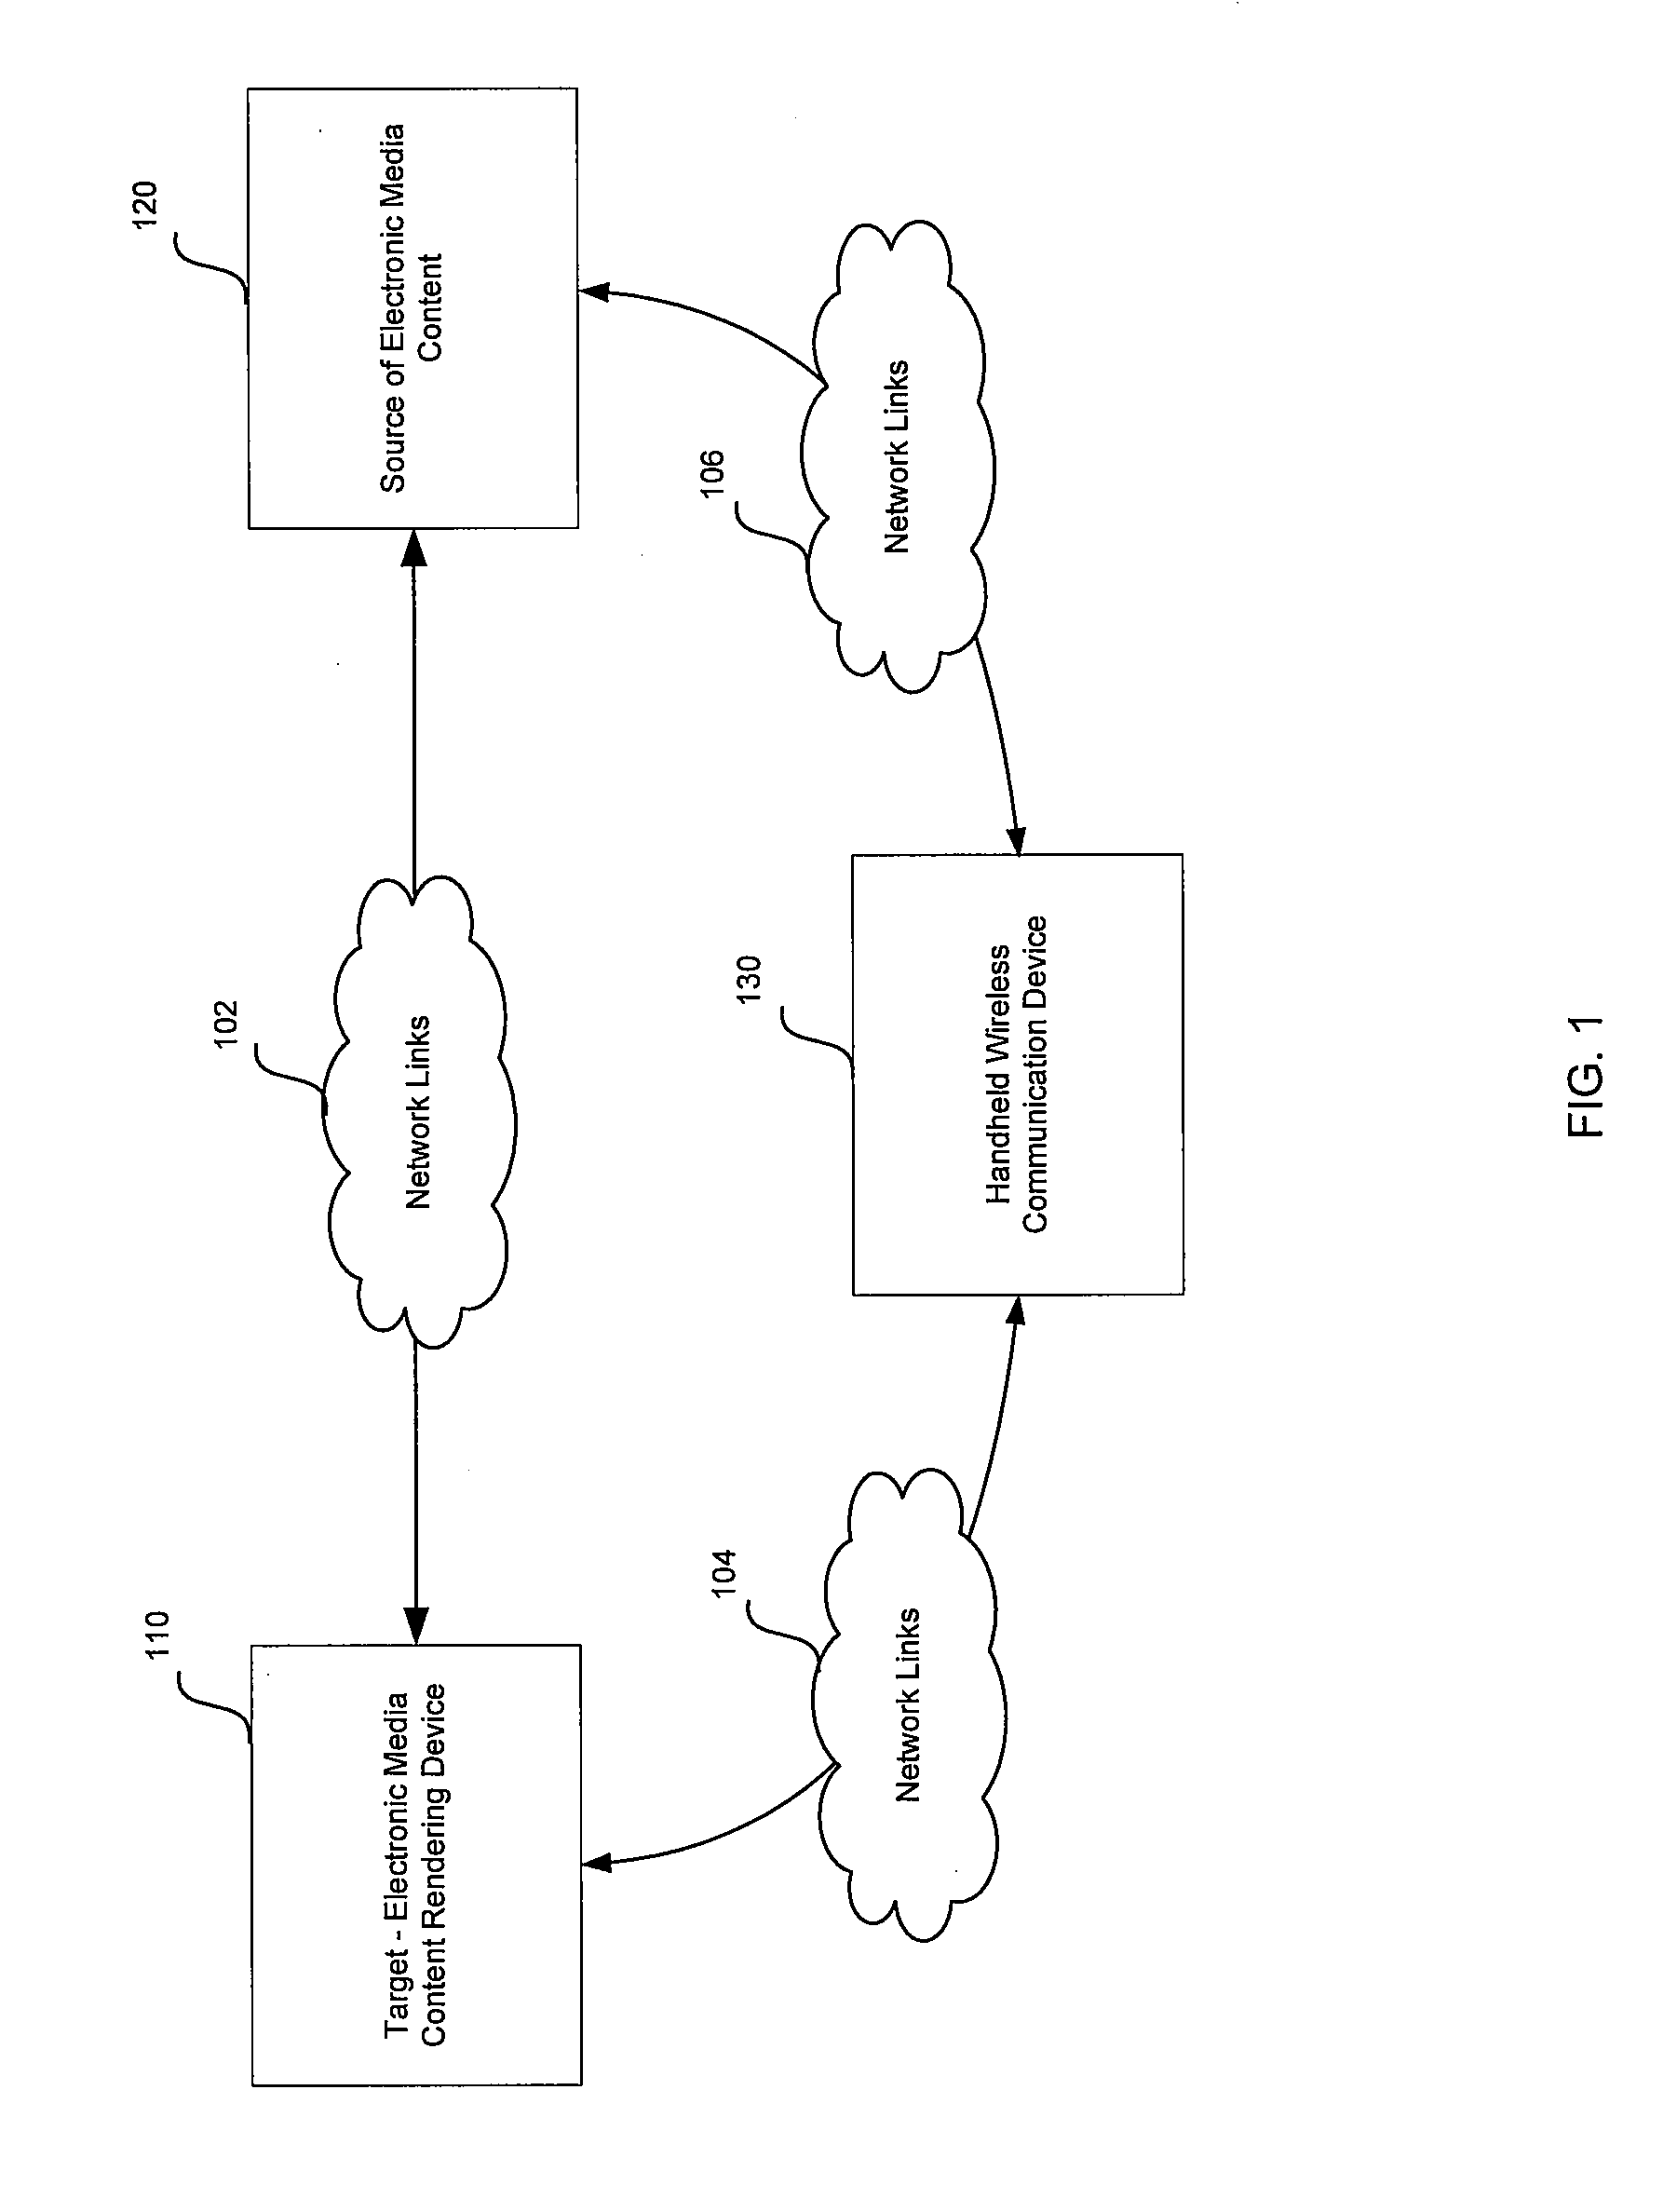 Method And System For Enabling Rendering Of Electronic Media Content Via A Secure Ad Hoc Network Configuration Utilizing A Handheld Wireless Communication Device